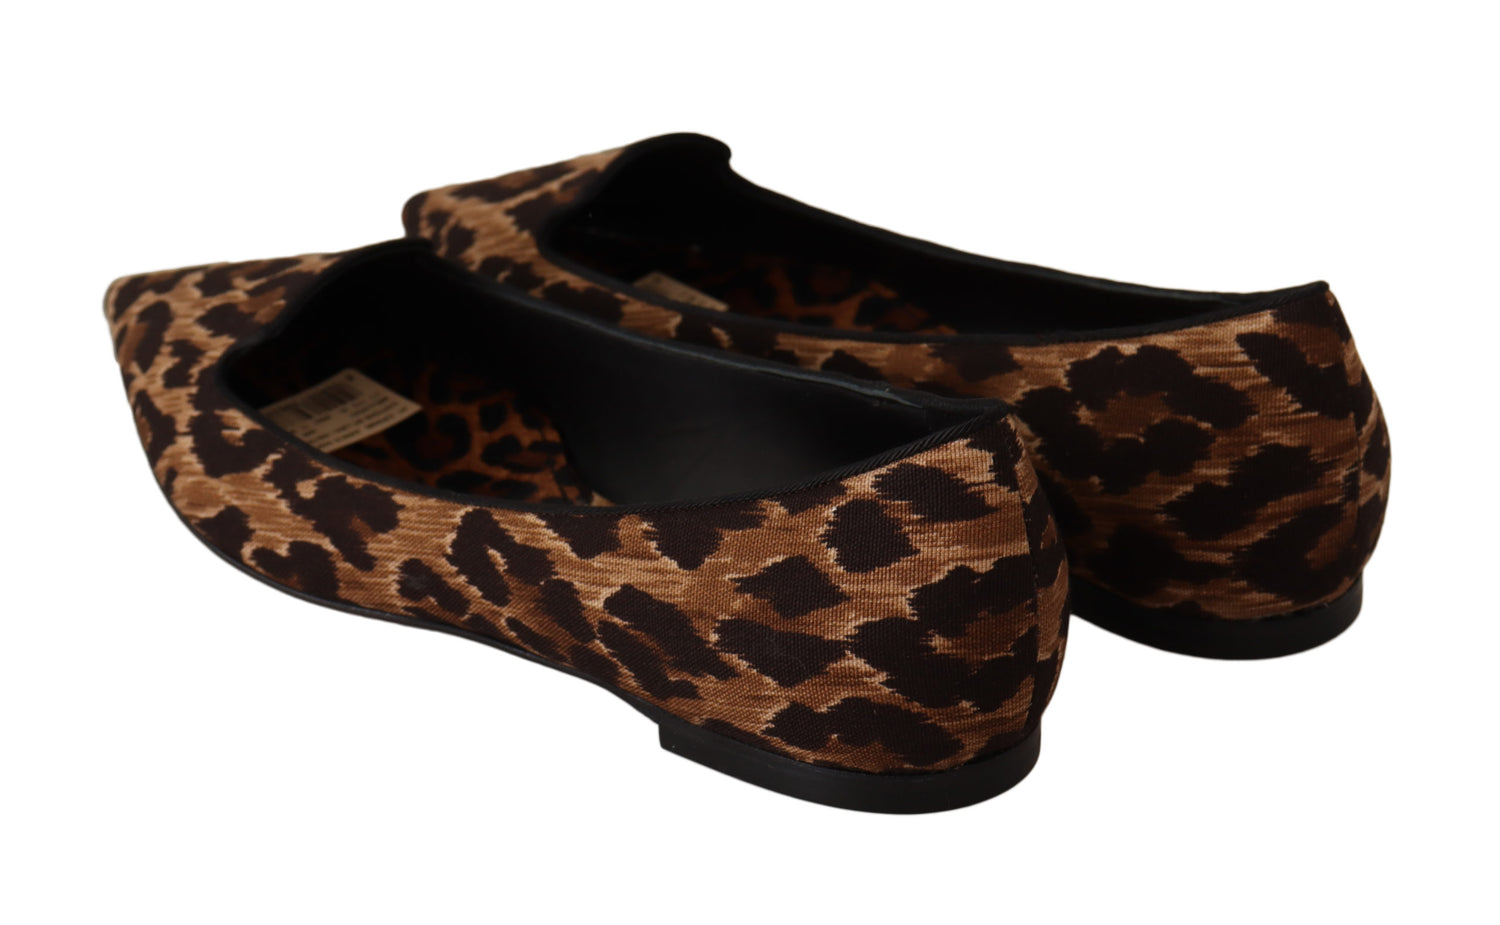 Brown Leopard Ballerina Flat Loafers Shoes